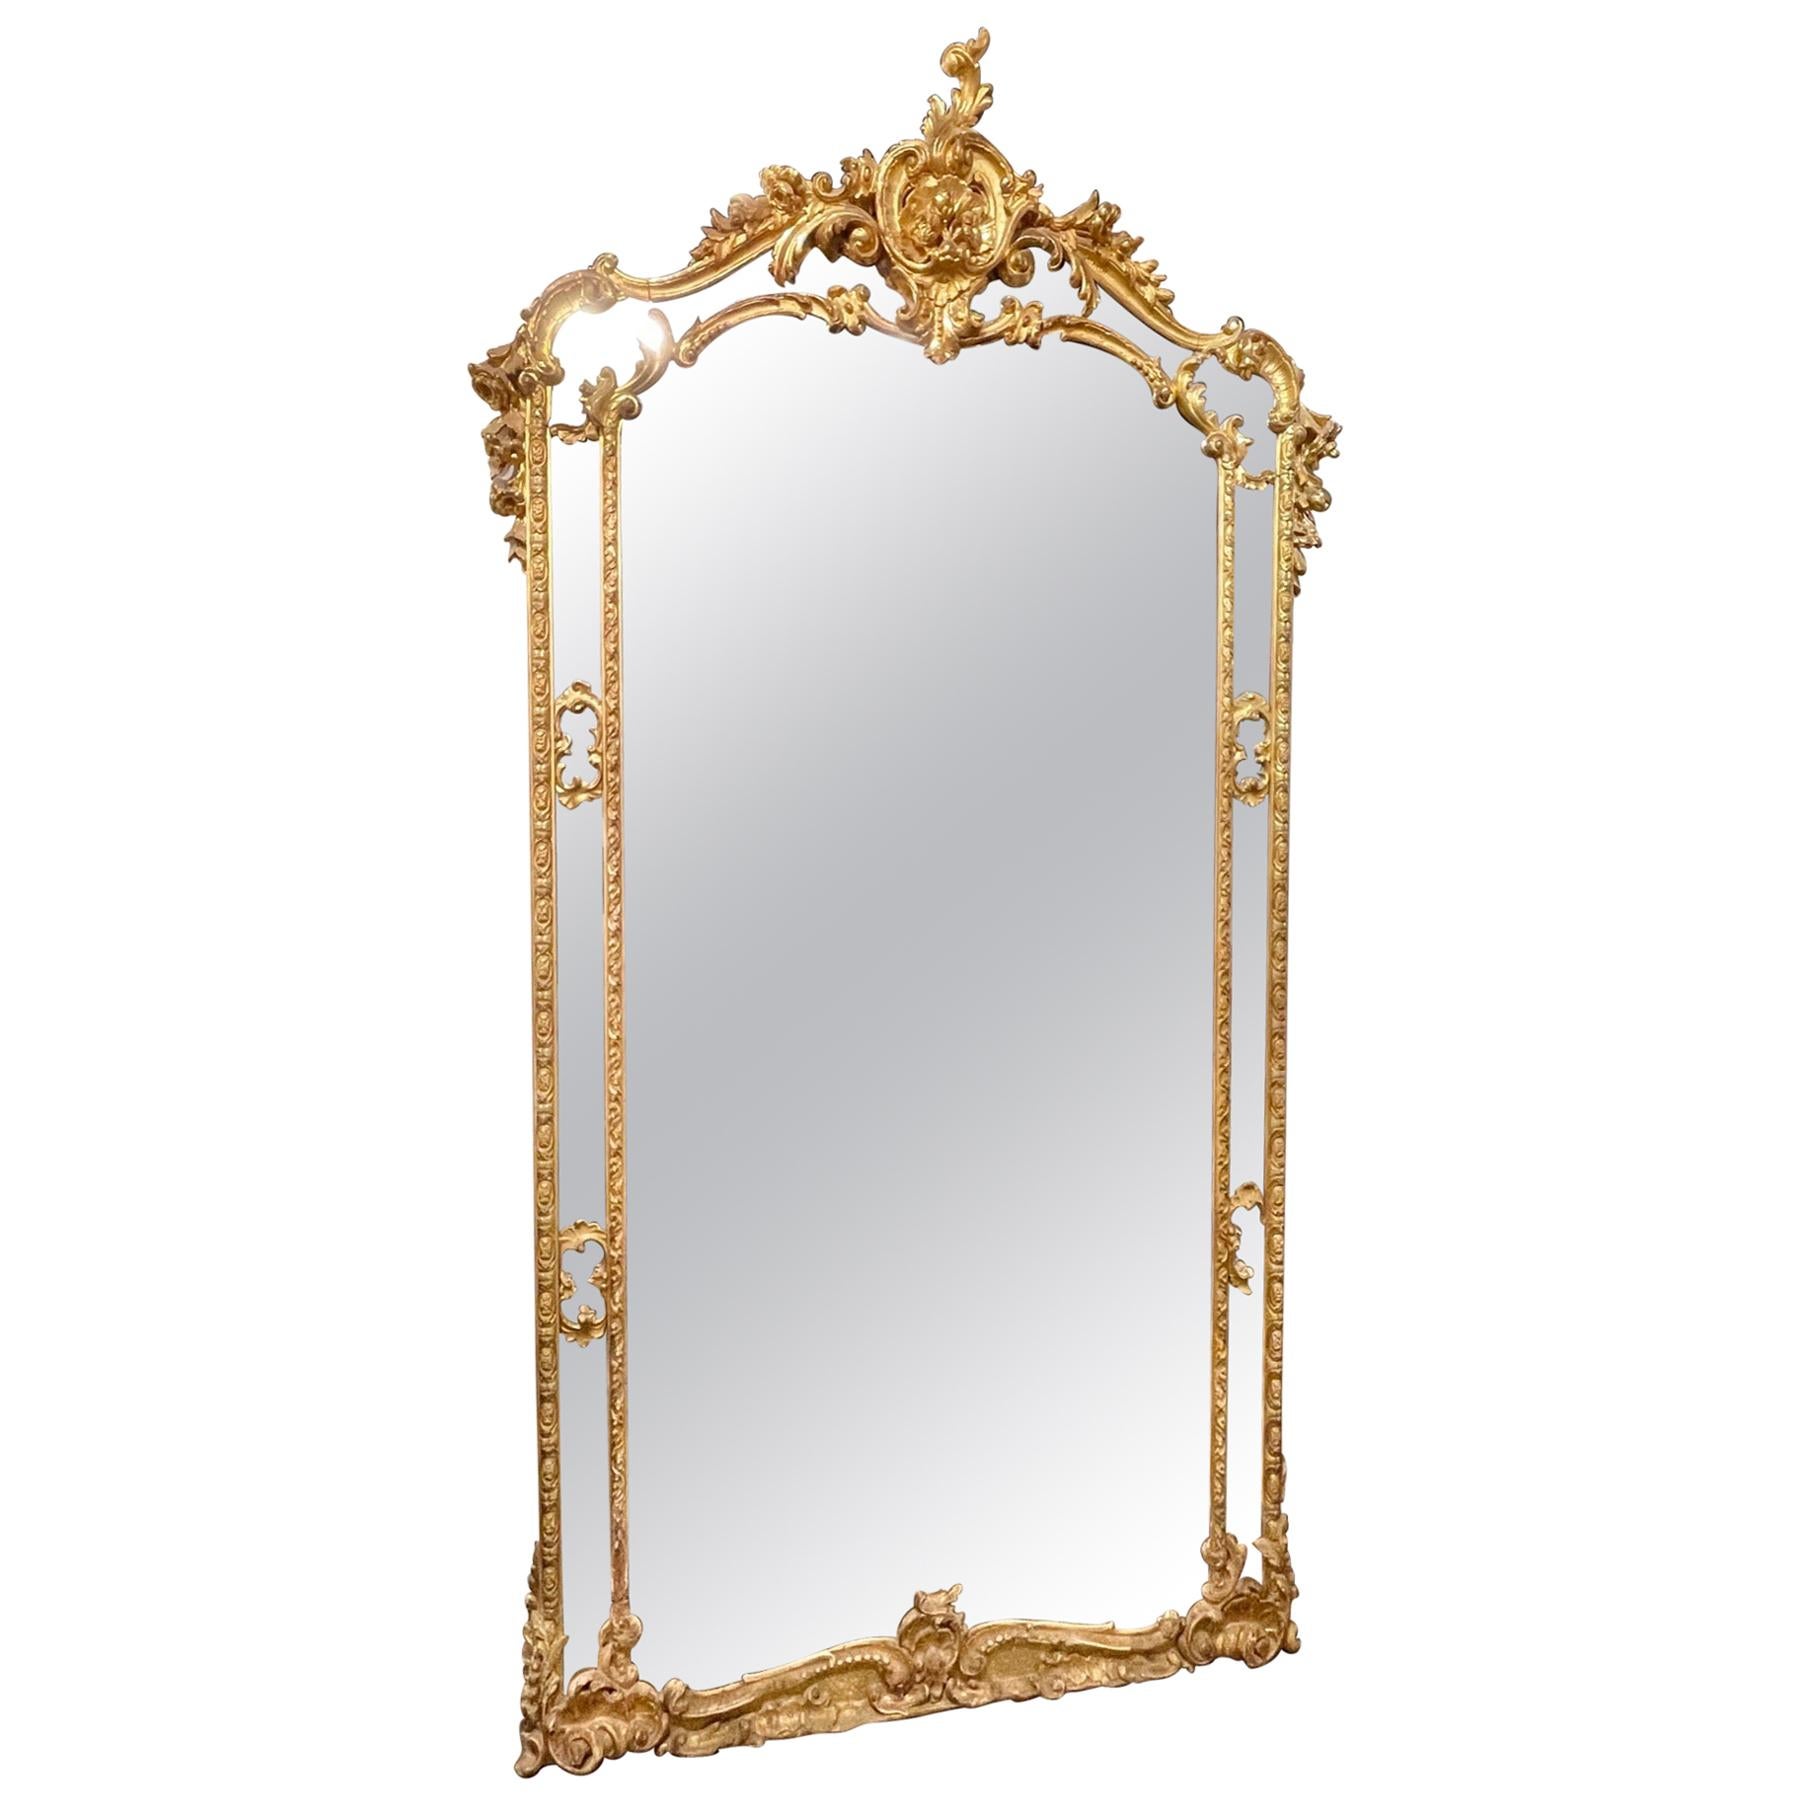 19th Century French Louis XV Style Giltwood Floor Mirror